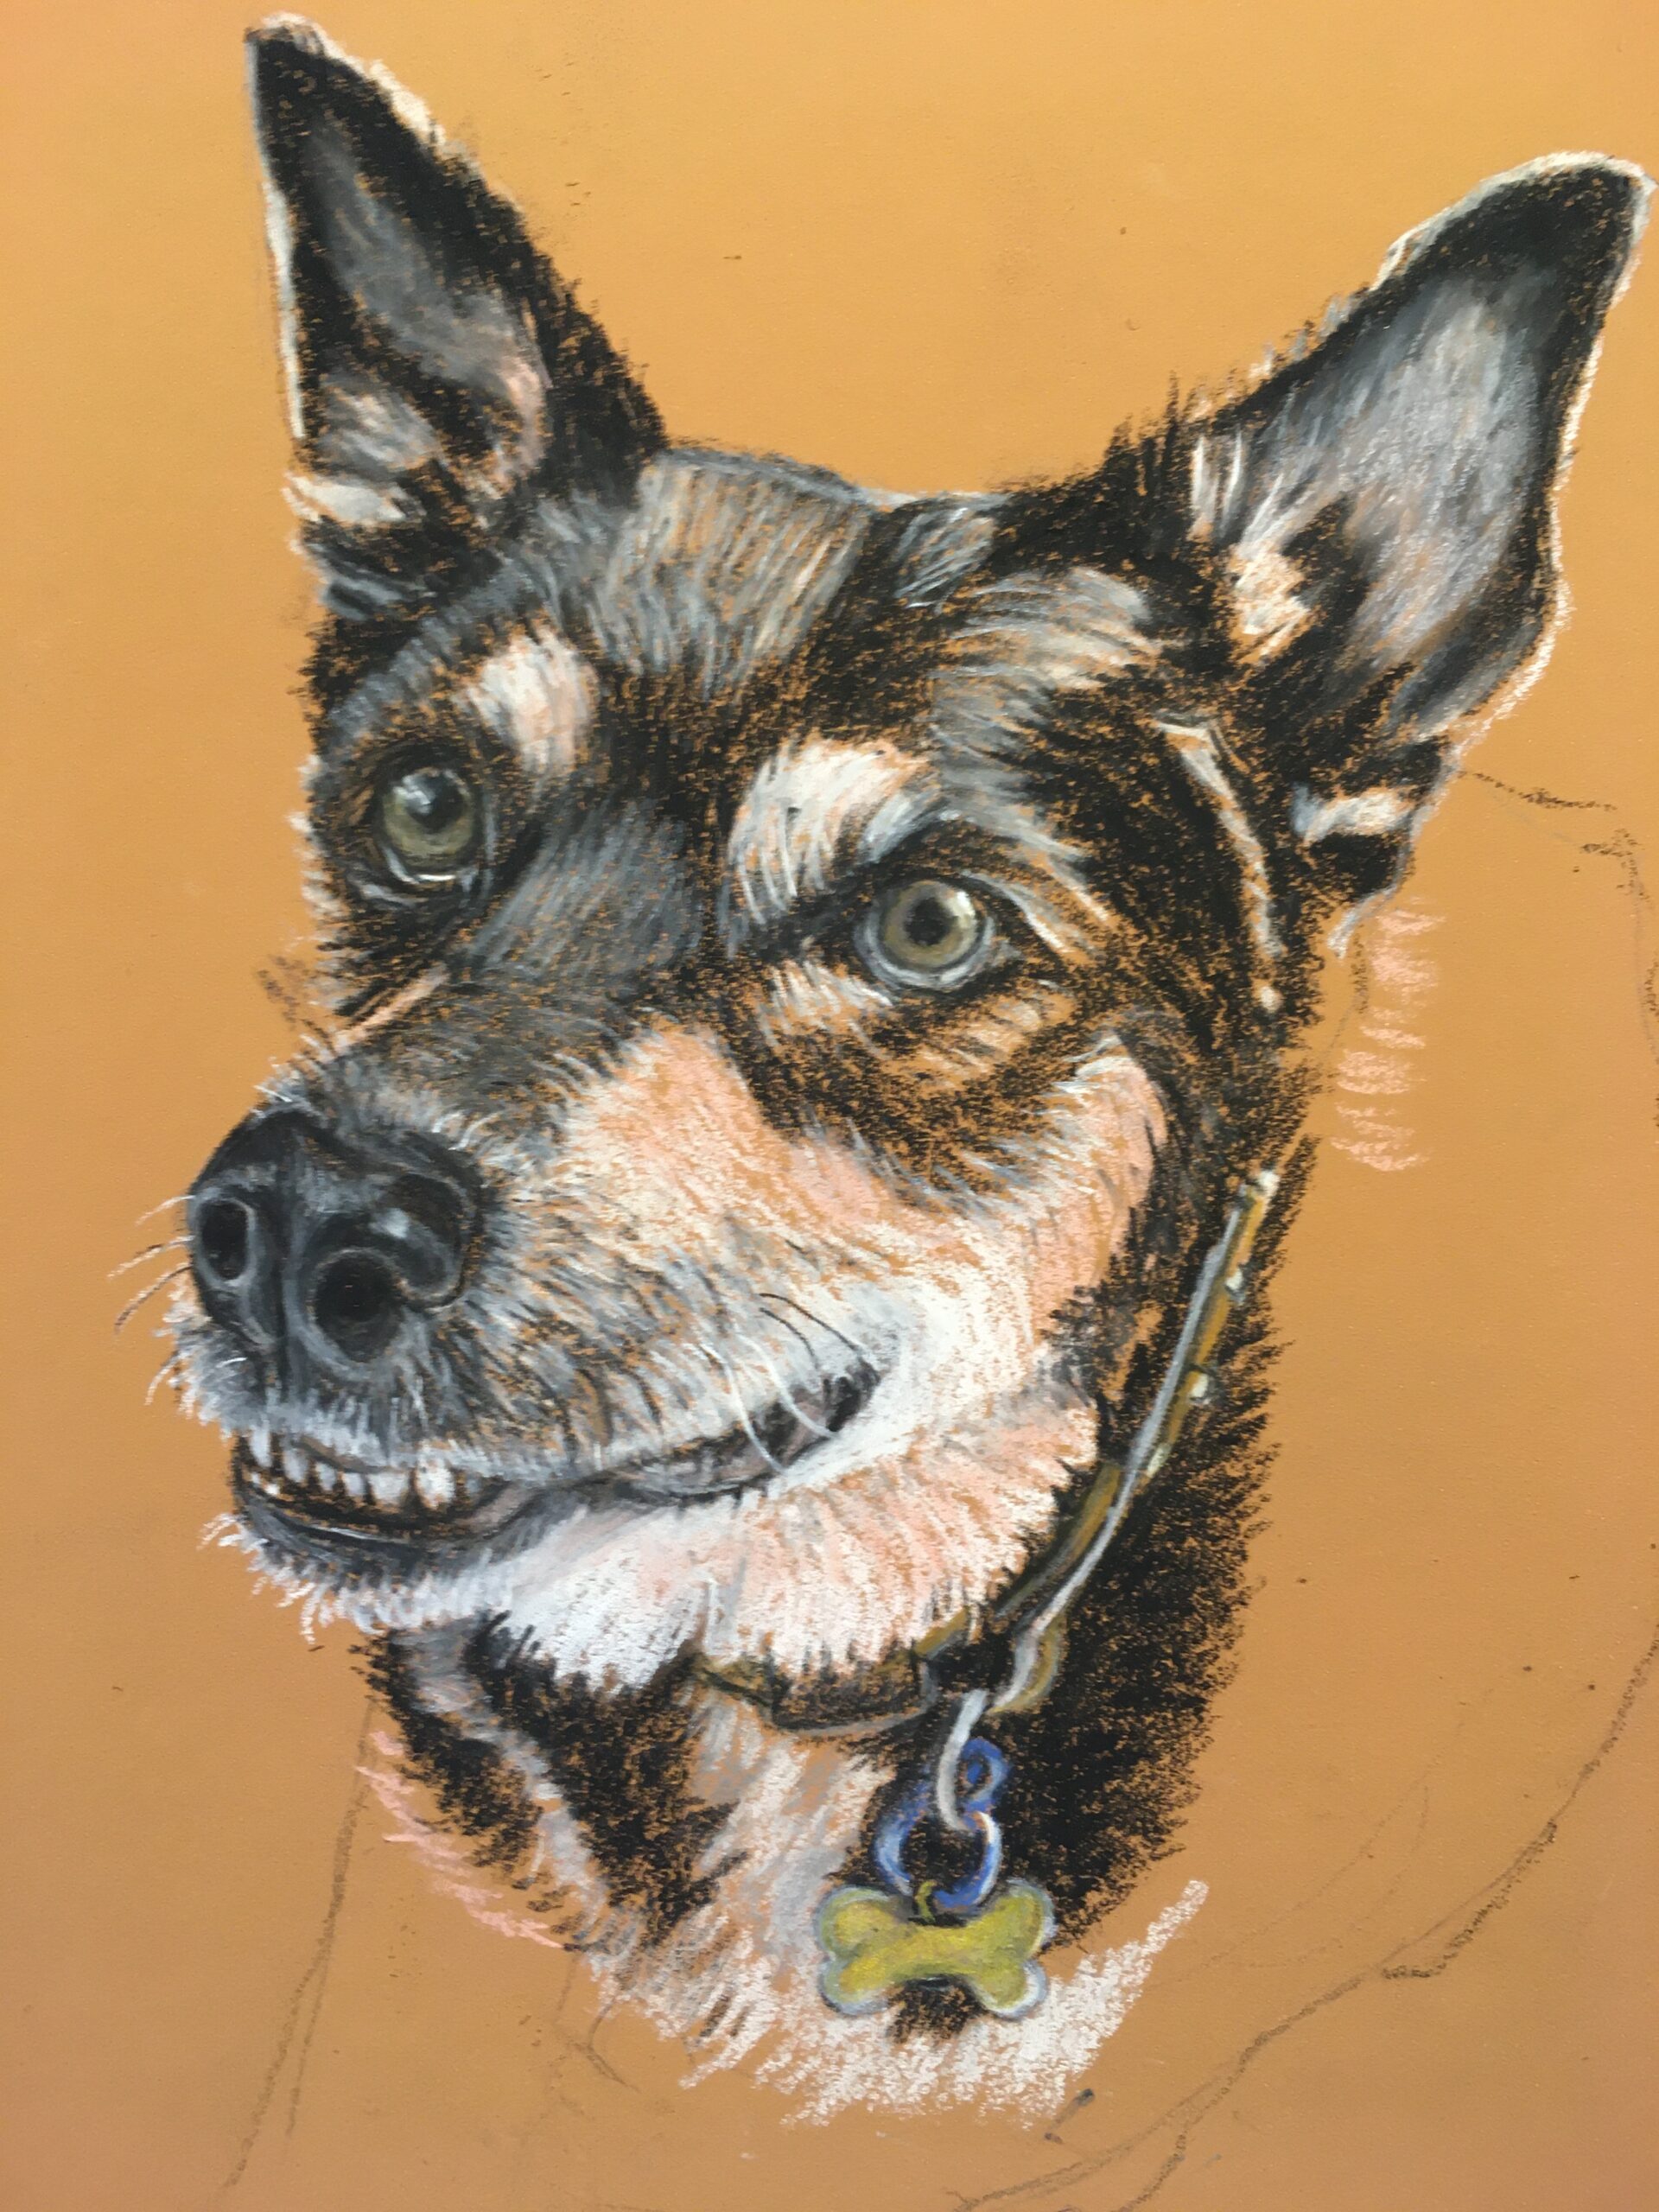 Image of a work in progress of a dog portrait commission with Lynda Young Artist Profile with Art Trails Tasmania